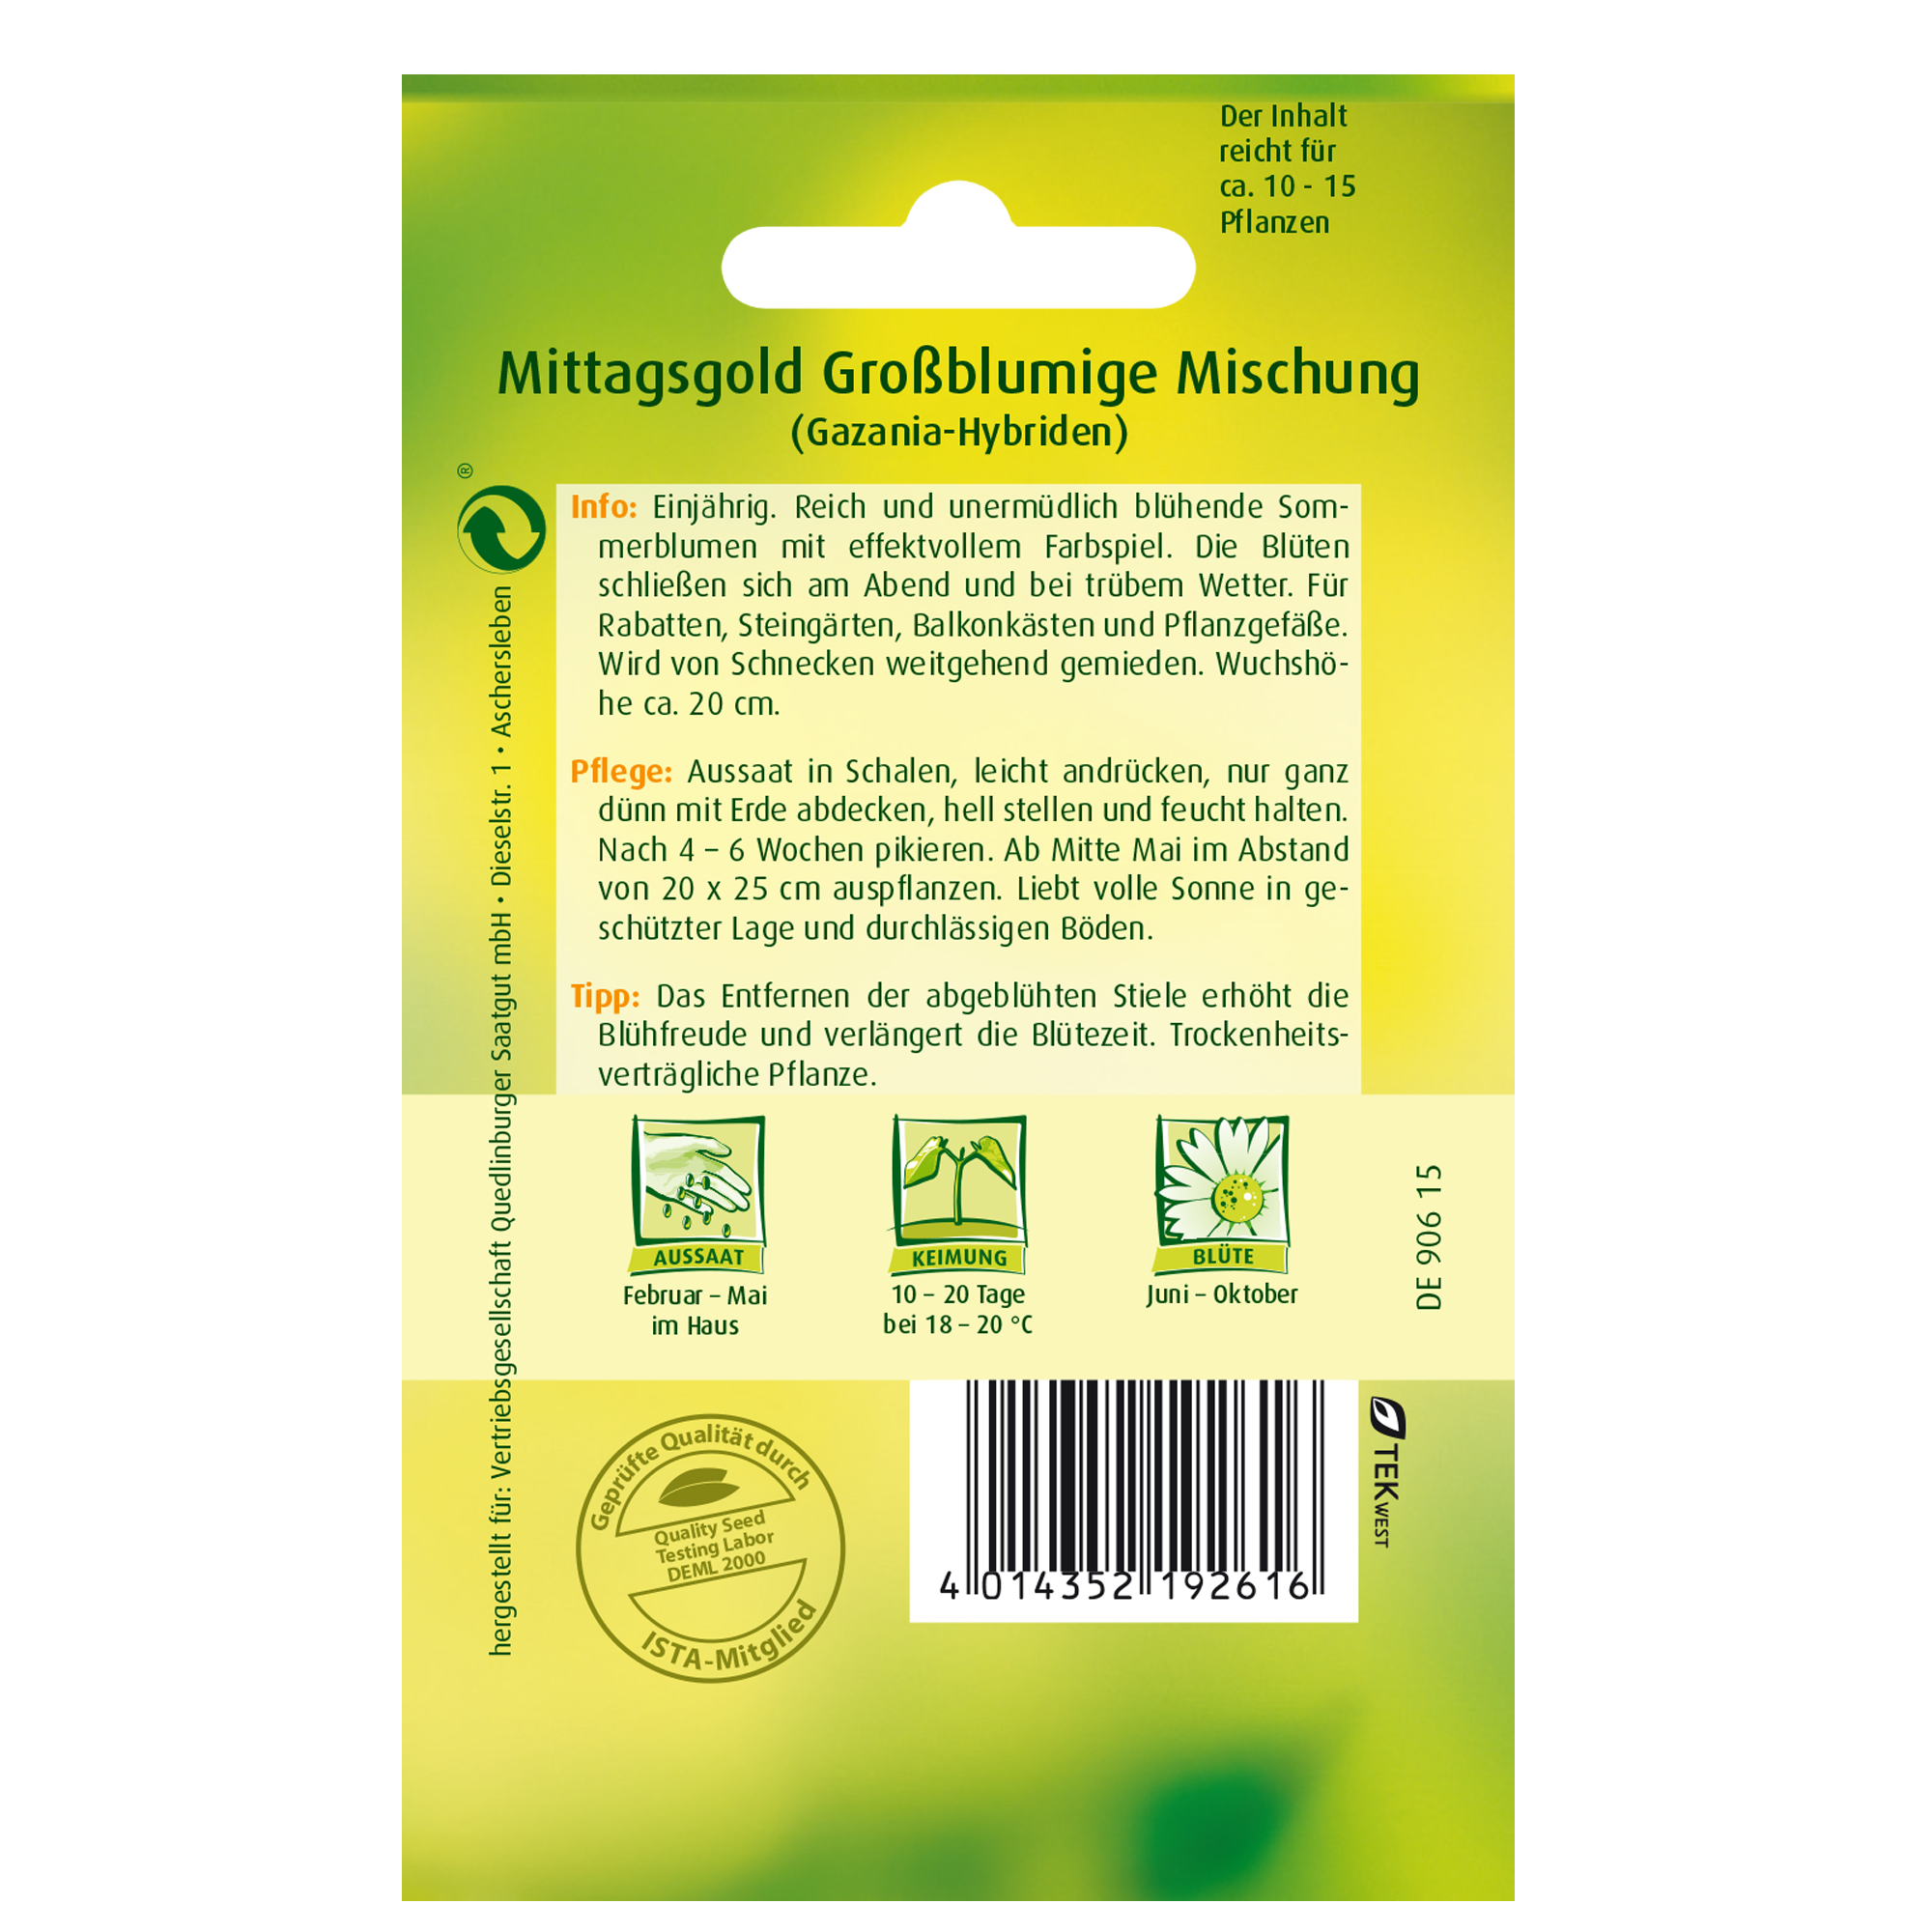 Mittagsgold großblumig, Mischung + product picture